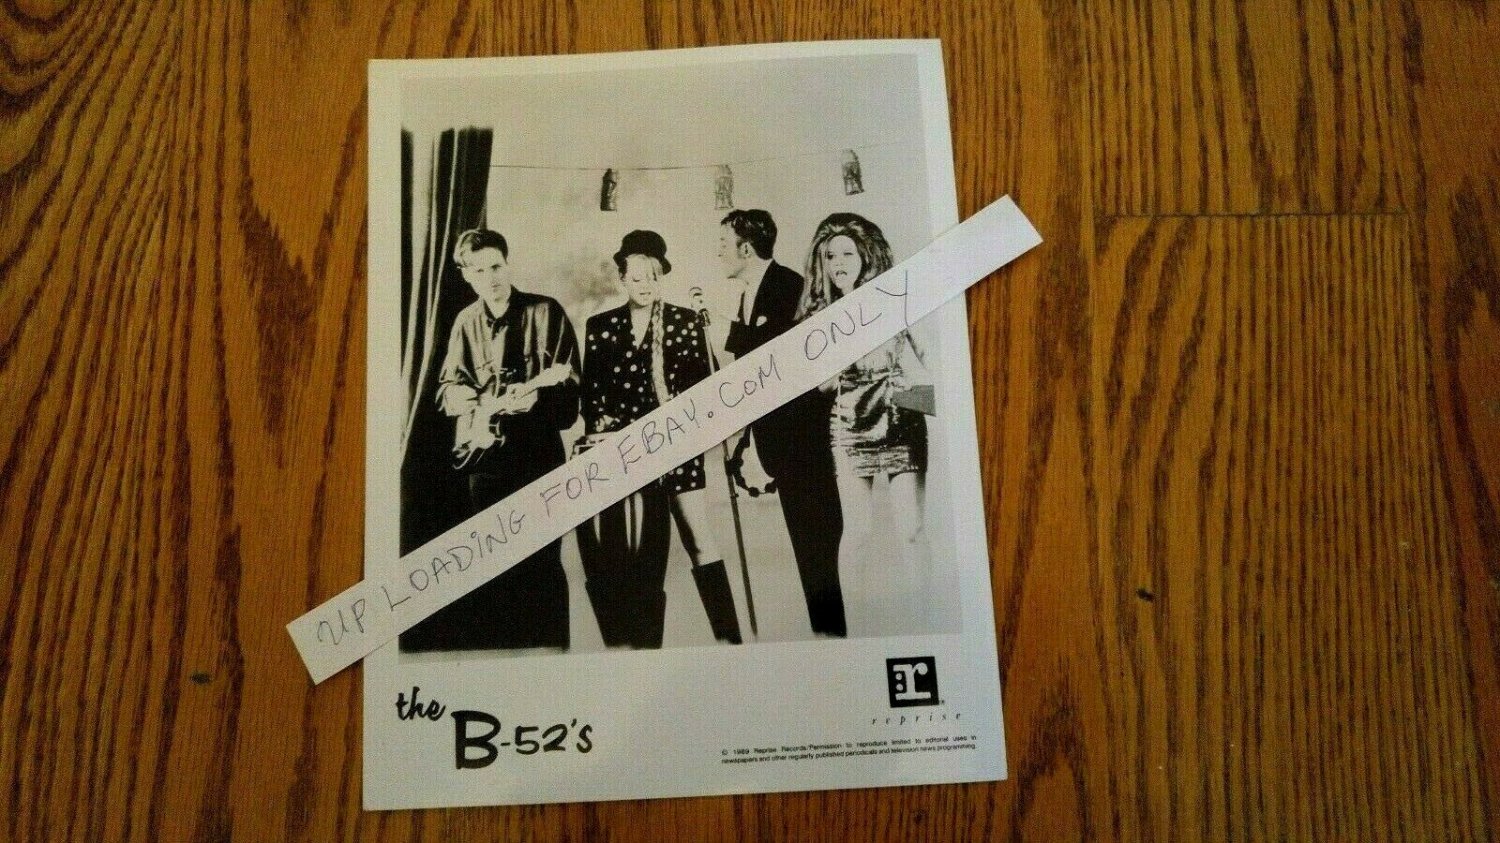 THE B-52's PROMO BLACK AND WHITE GLOSSY 8 X 10 INCHES PHOTO 1989 VERY RARE!!